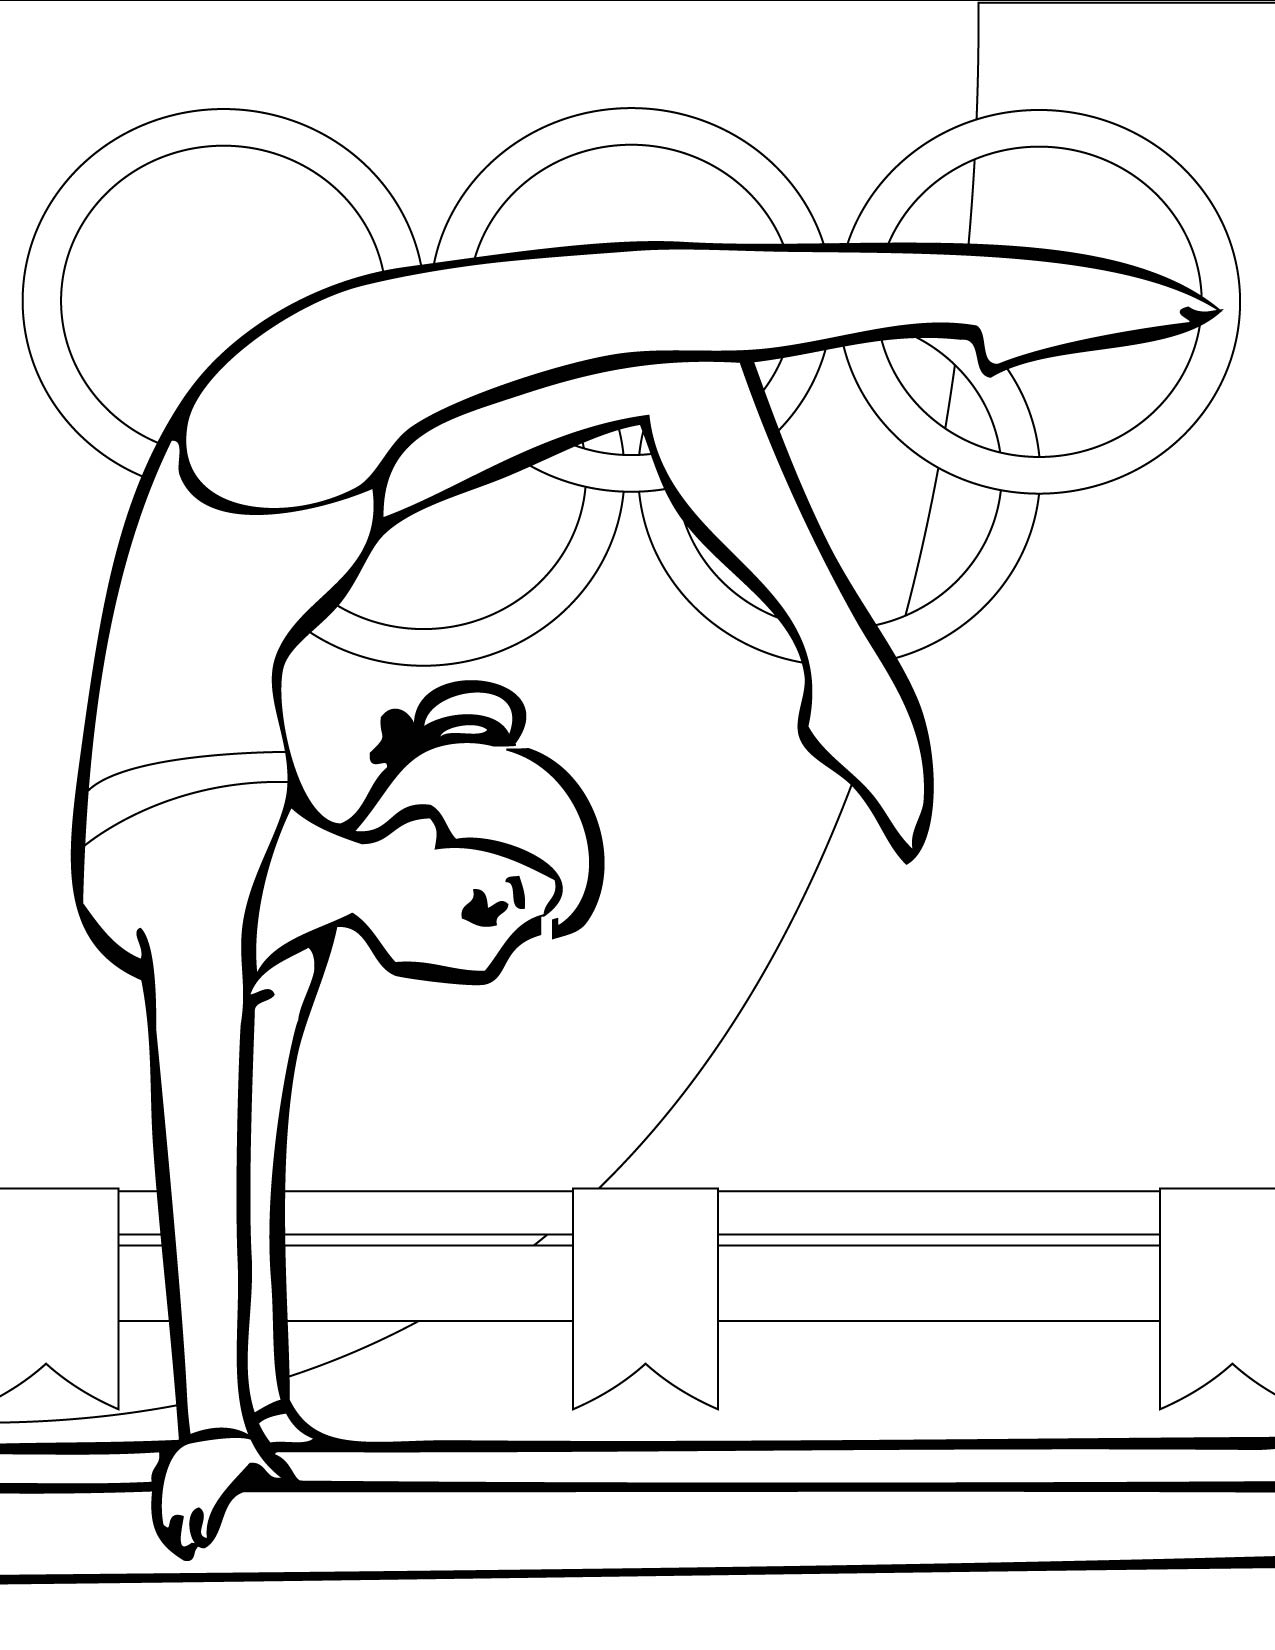 Coloring Pages For Kids Gymnastics The Balance